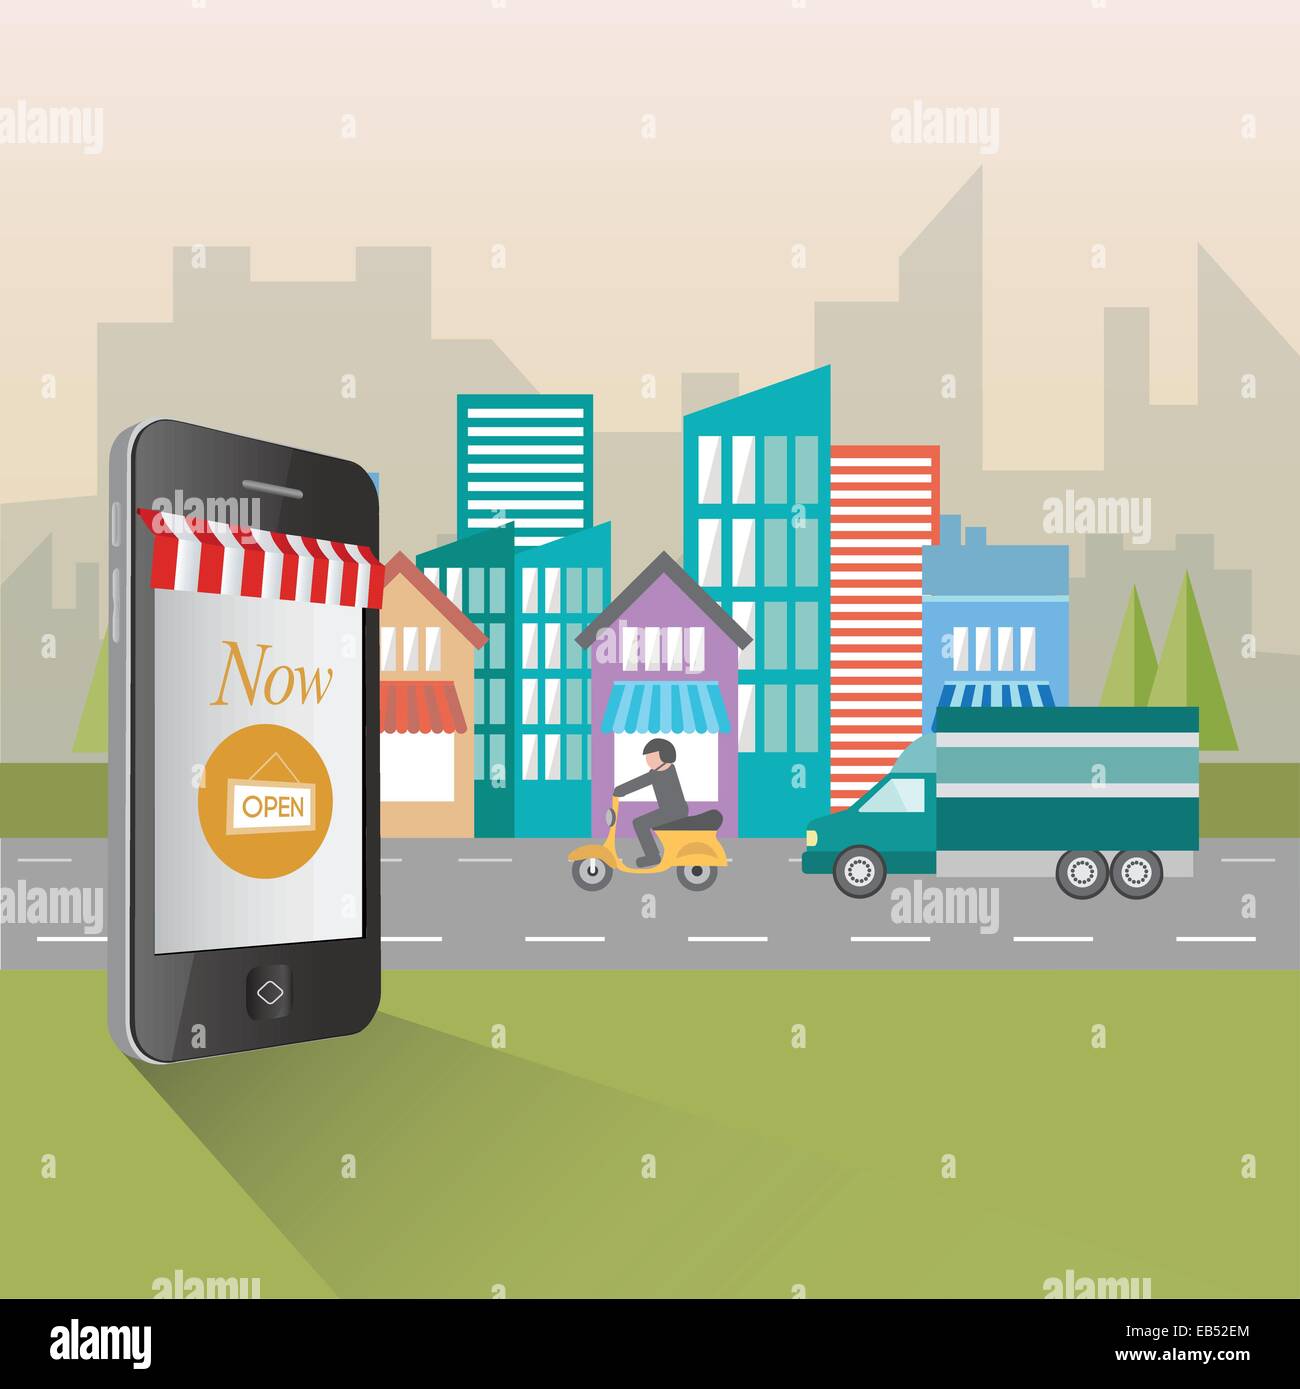 Online shopping and retail concept illustration Stock Vector